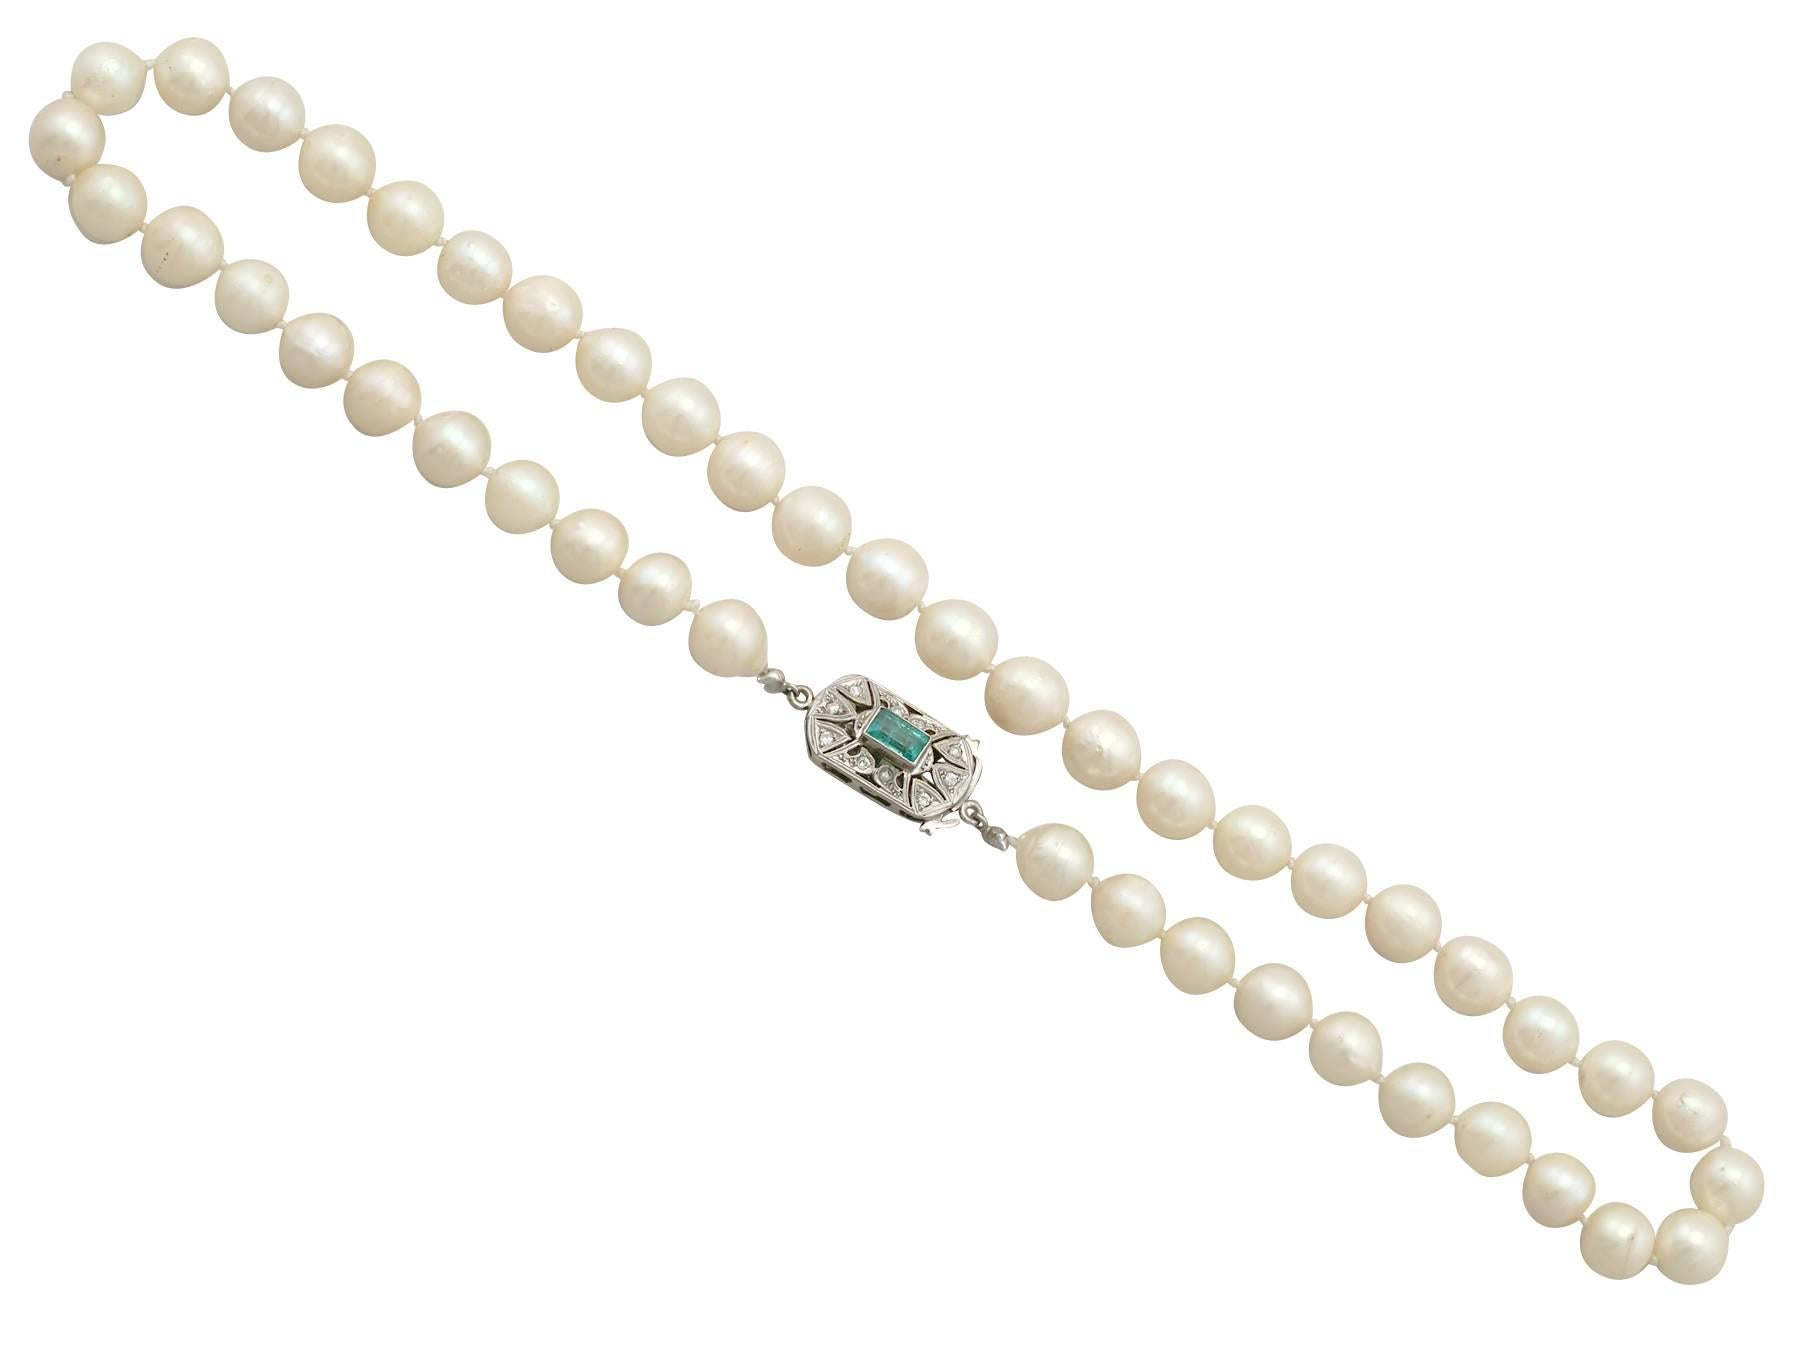 An impressive cultured pearl and 0.70 carat emerald, 0.10 carat diamond and 9 karat white gold single strand necklace; part of our diverse vintage jewelry collections

This fine and impressive single strand cultured pearl necklace consists of